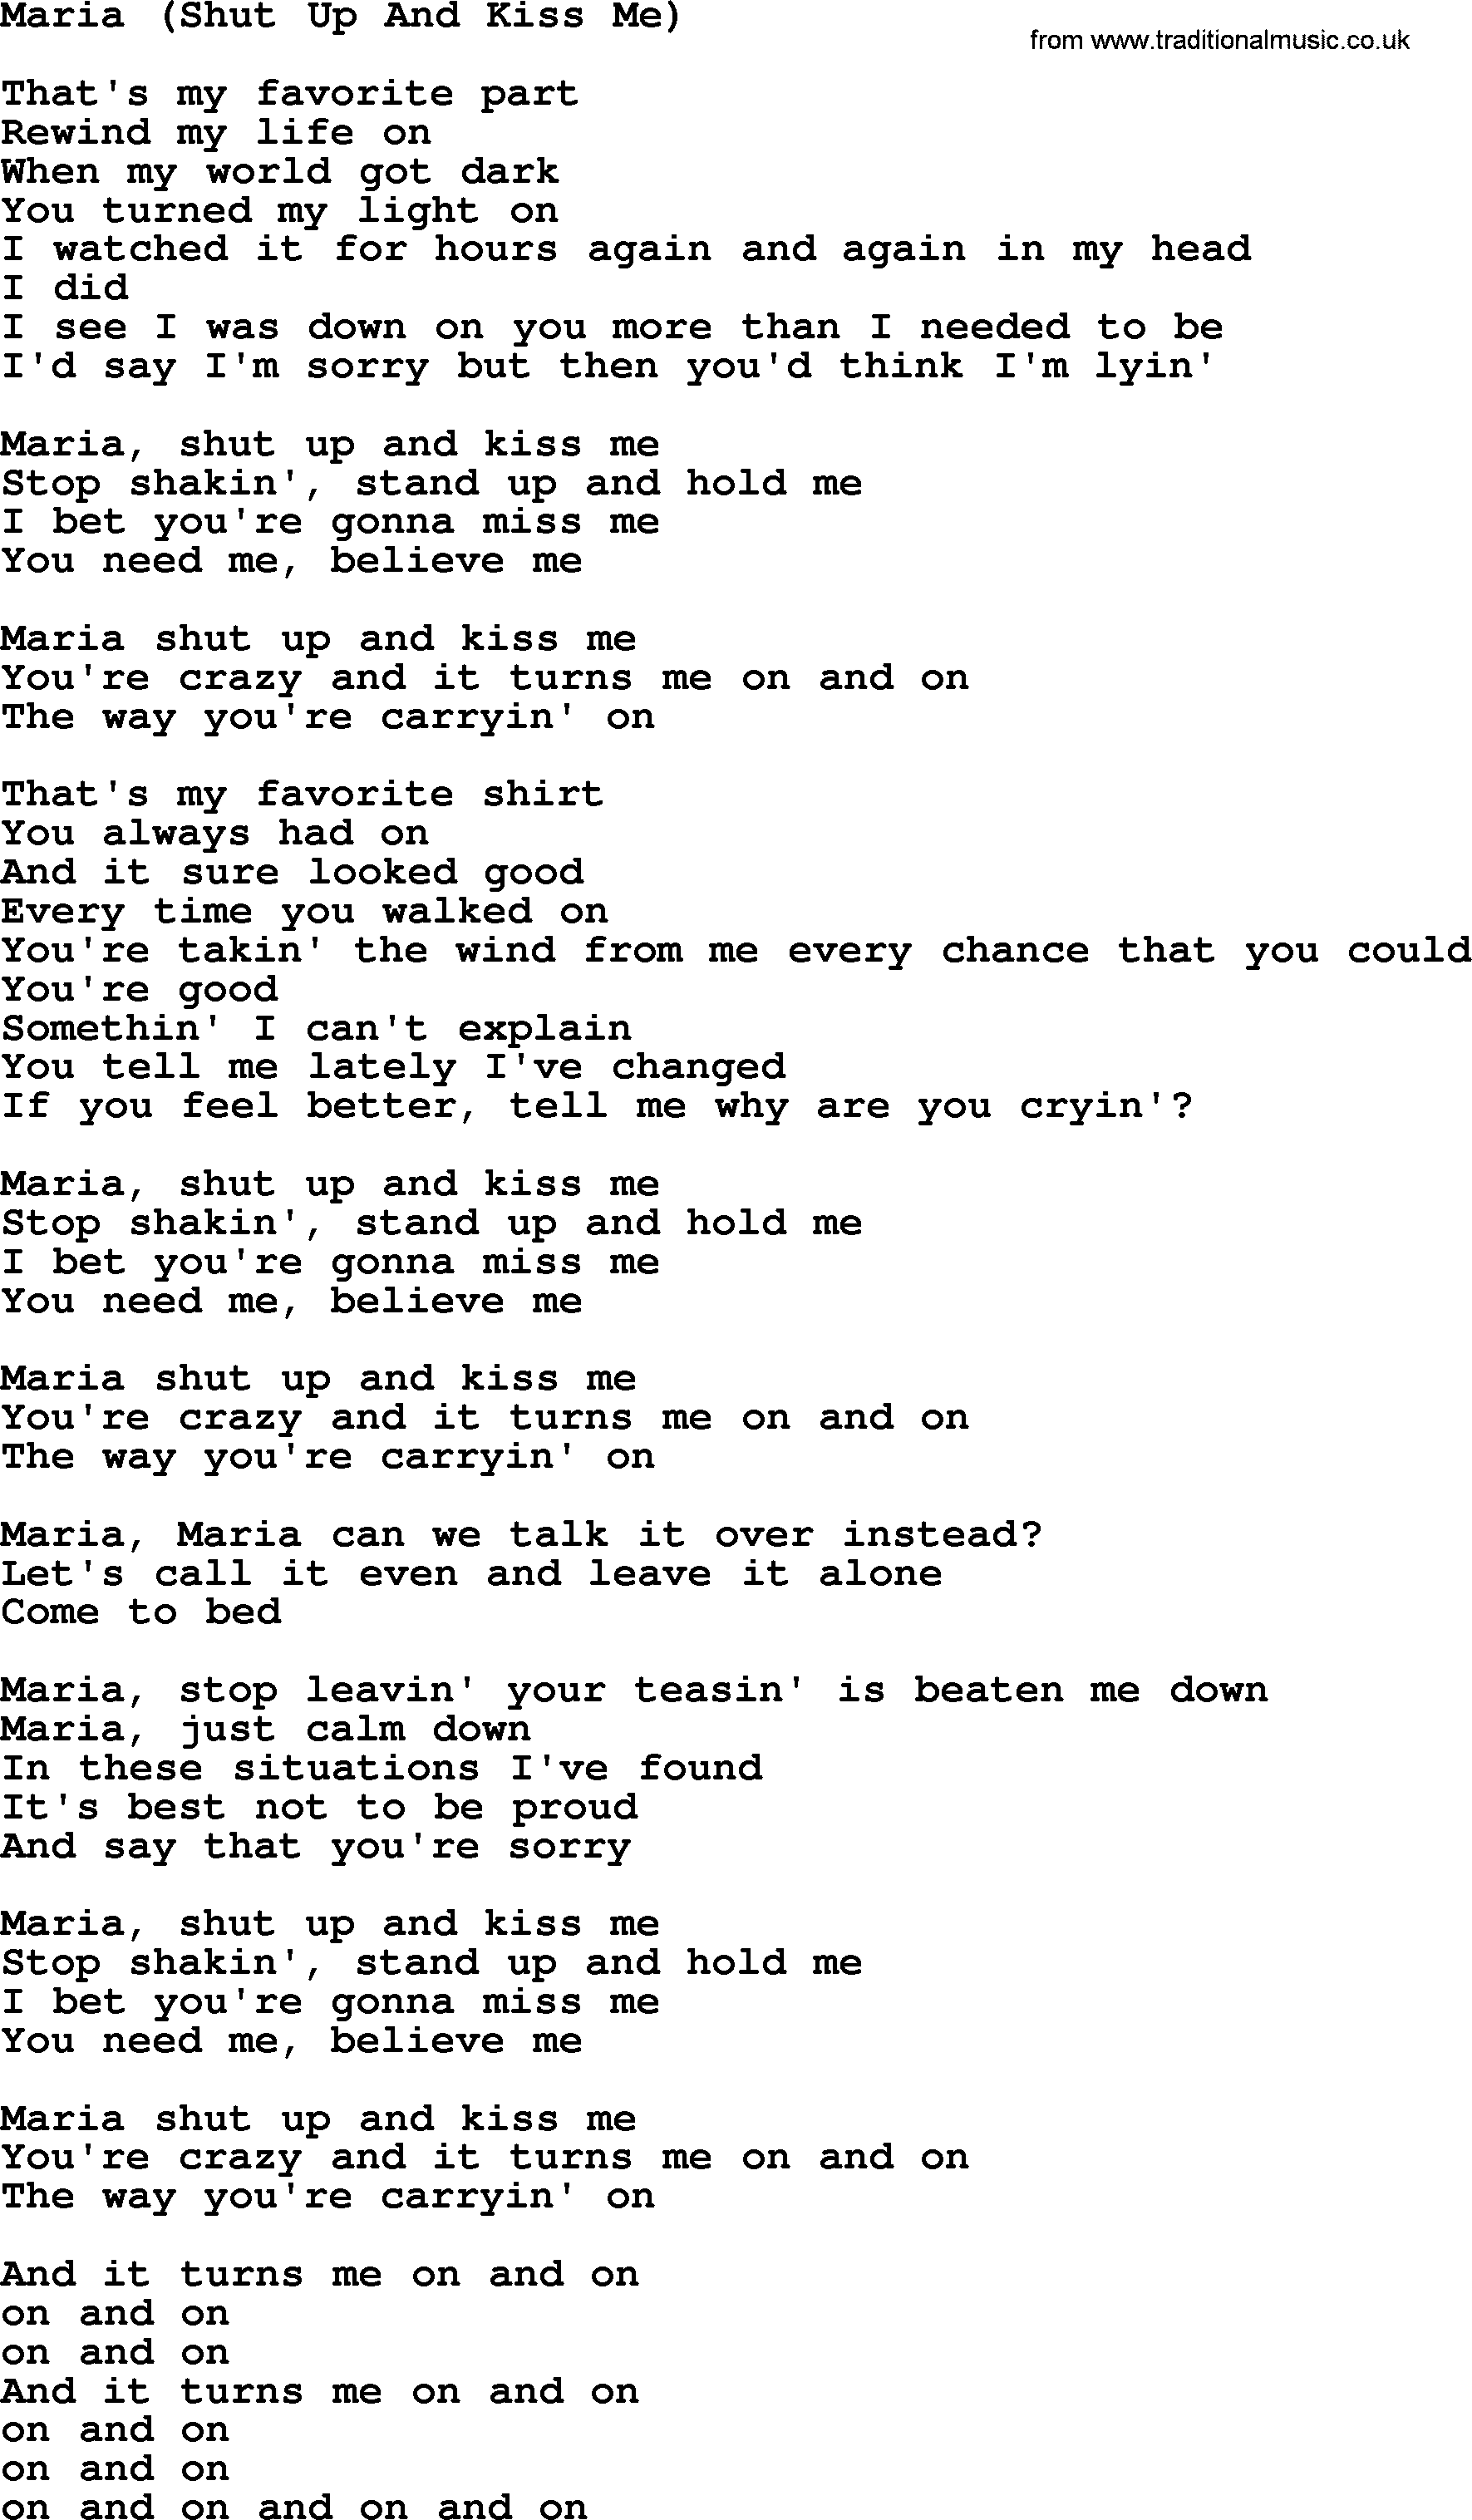 Willie Nelson song: Maria (Shut Up And Kiss Me) lyrics